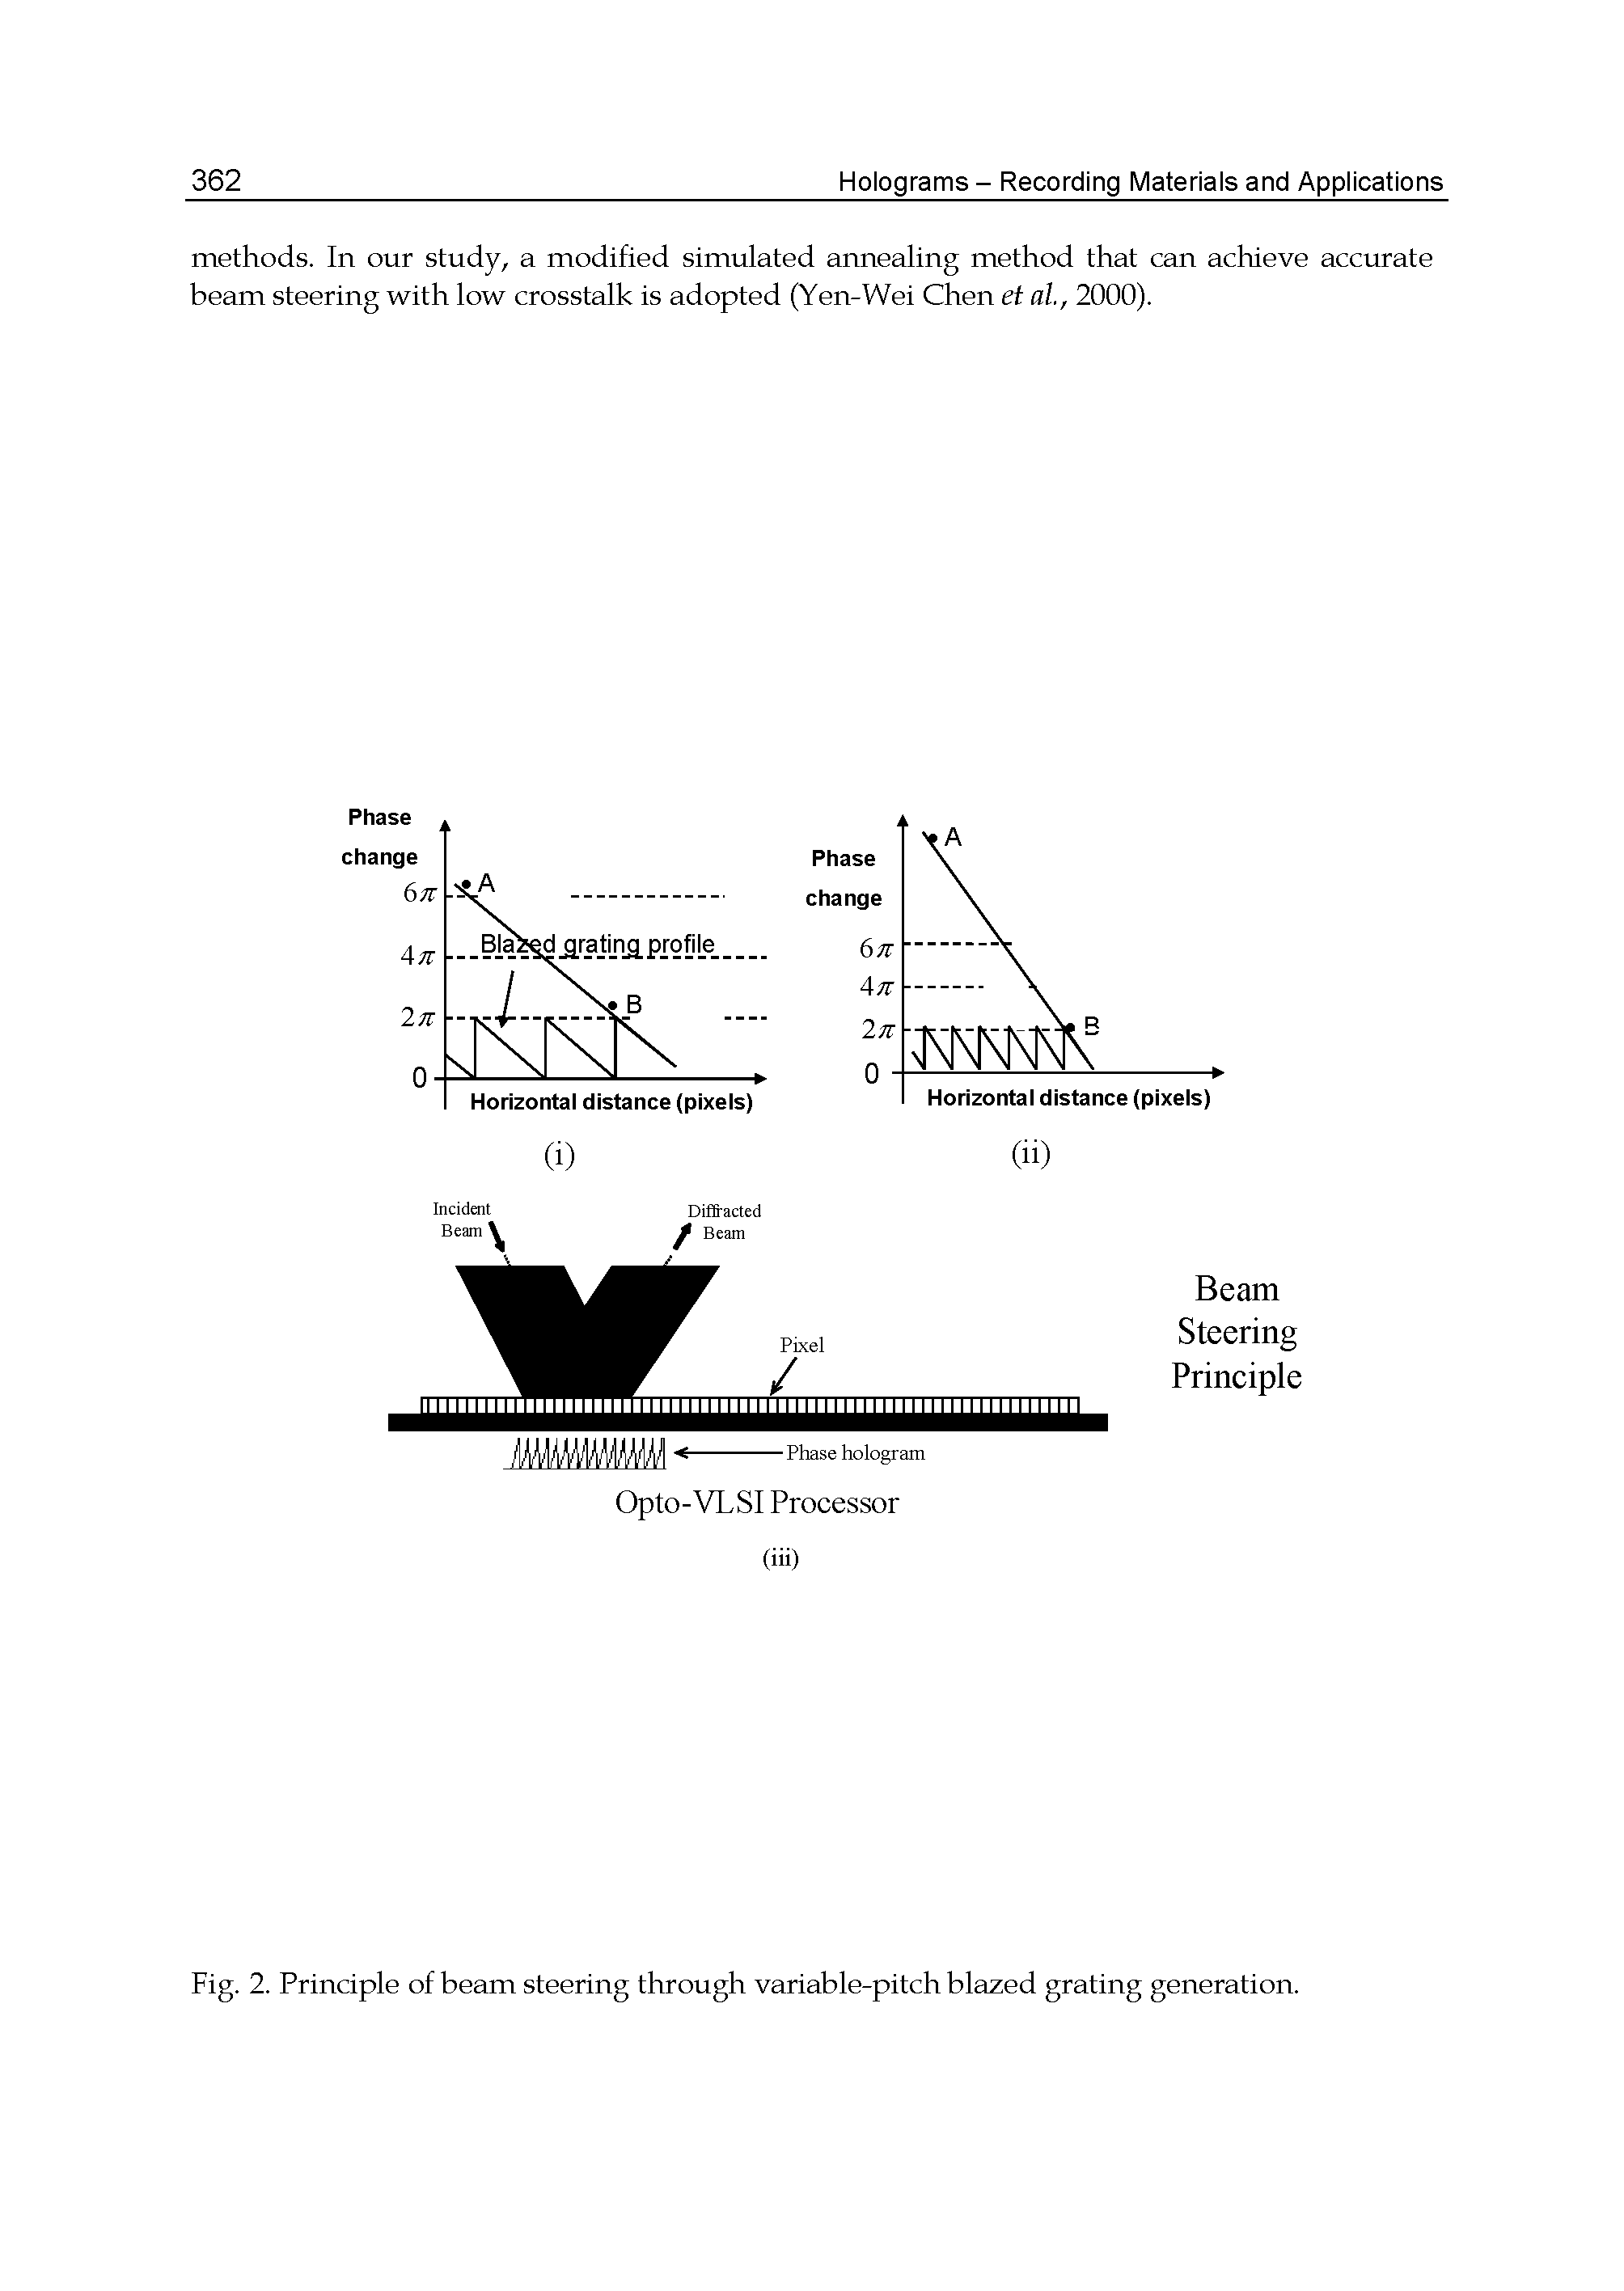 Fig. 2. Principle of beam steering through variable-pitch blazed grating generation.